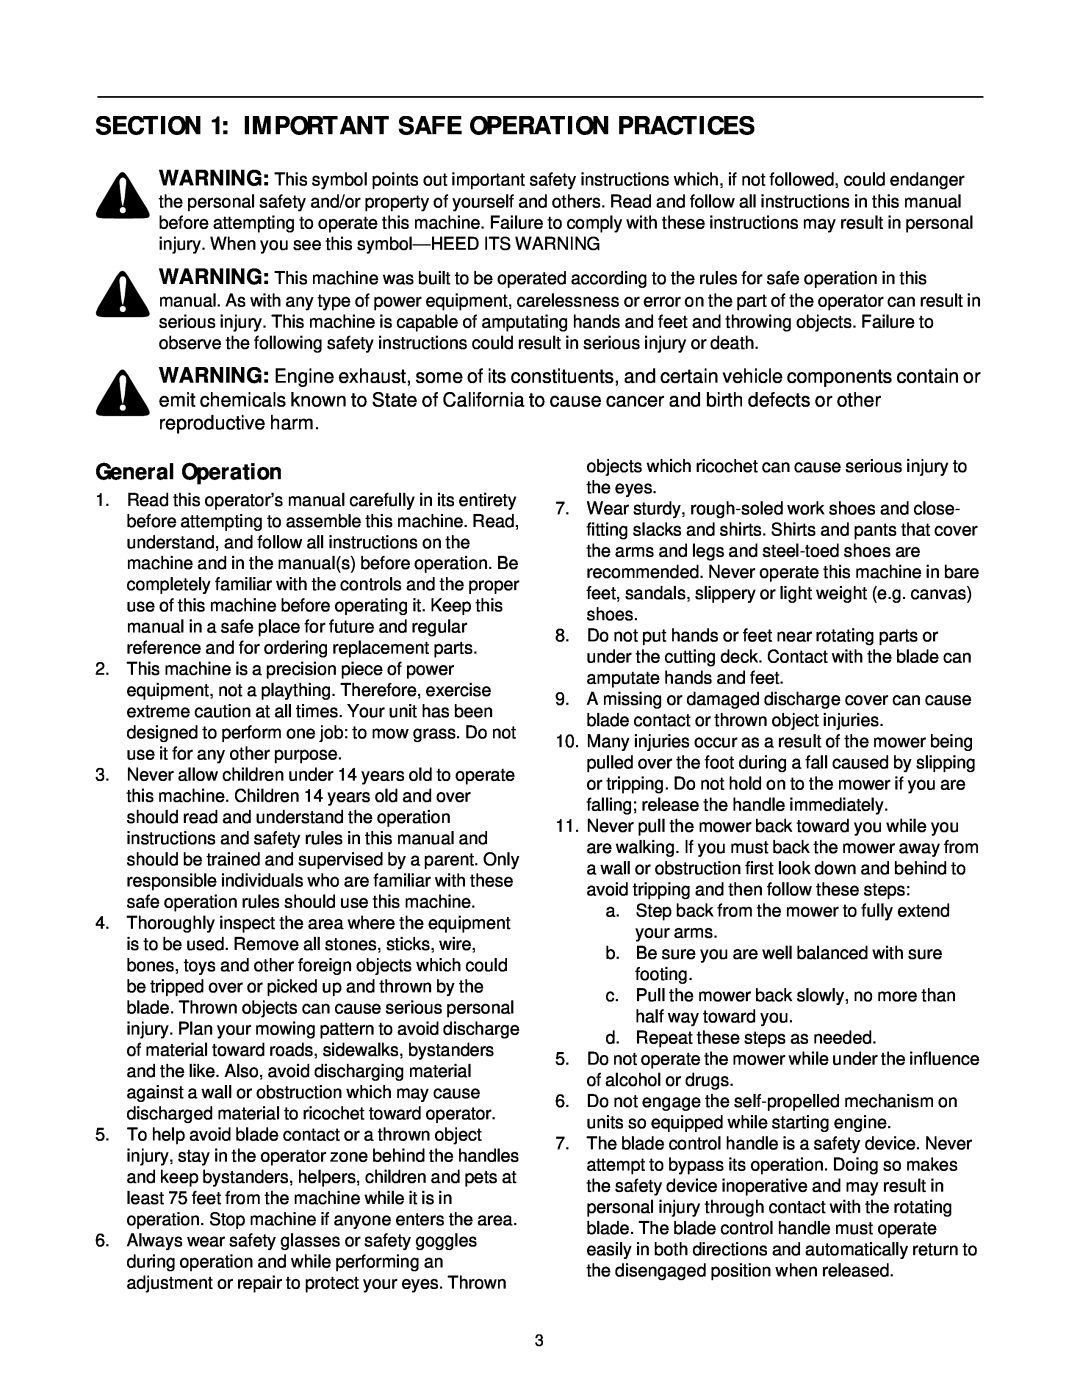 Yard-Man 437 manual Important Safe Operation Practices, General Operation 